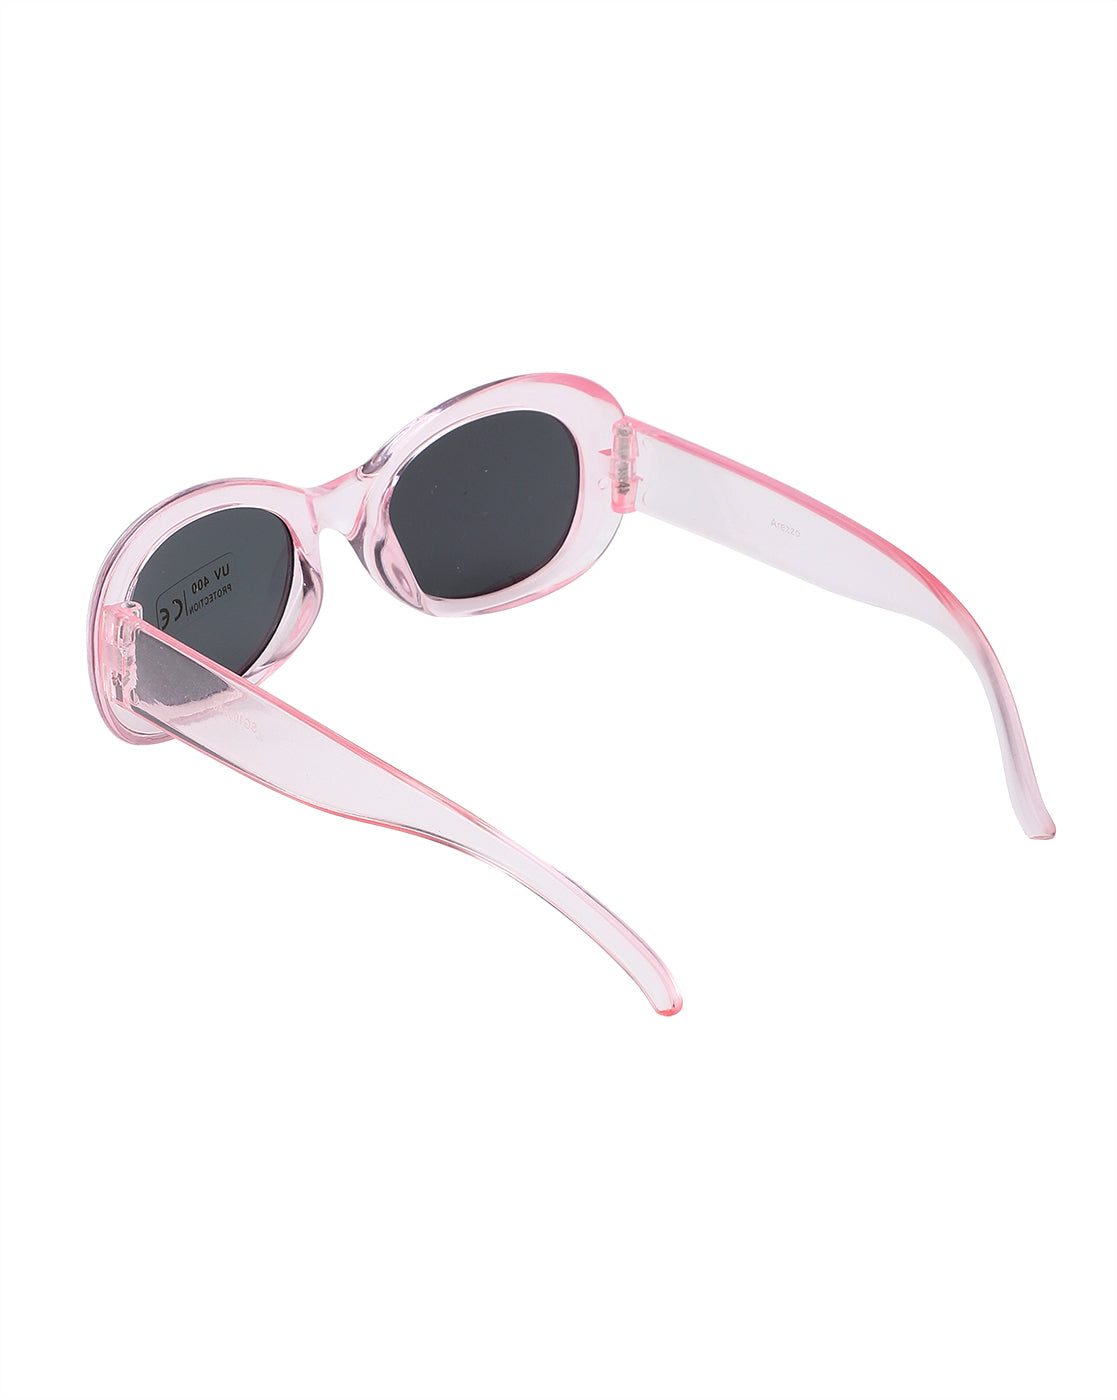 Carlton London Oval Sunglasses With Uv Protected Lens For Girl